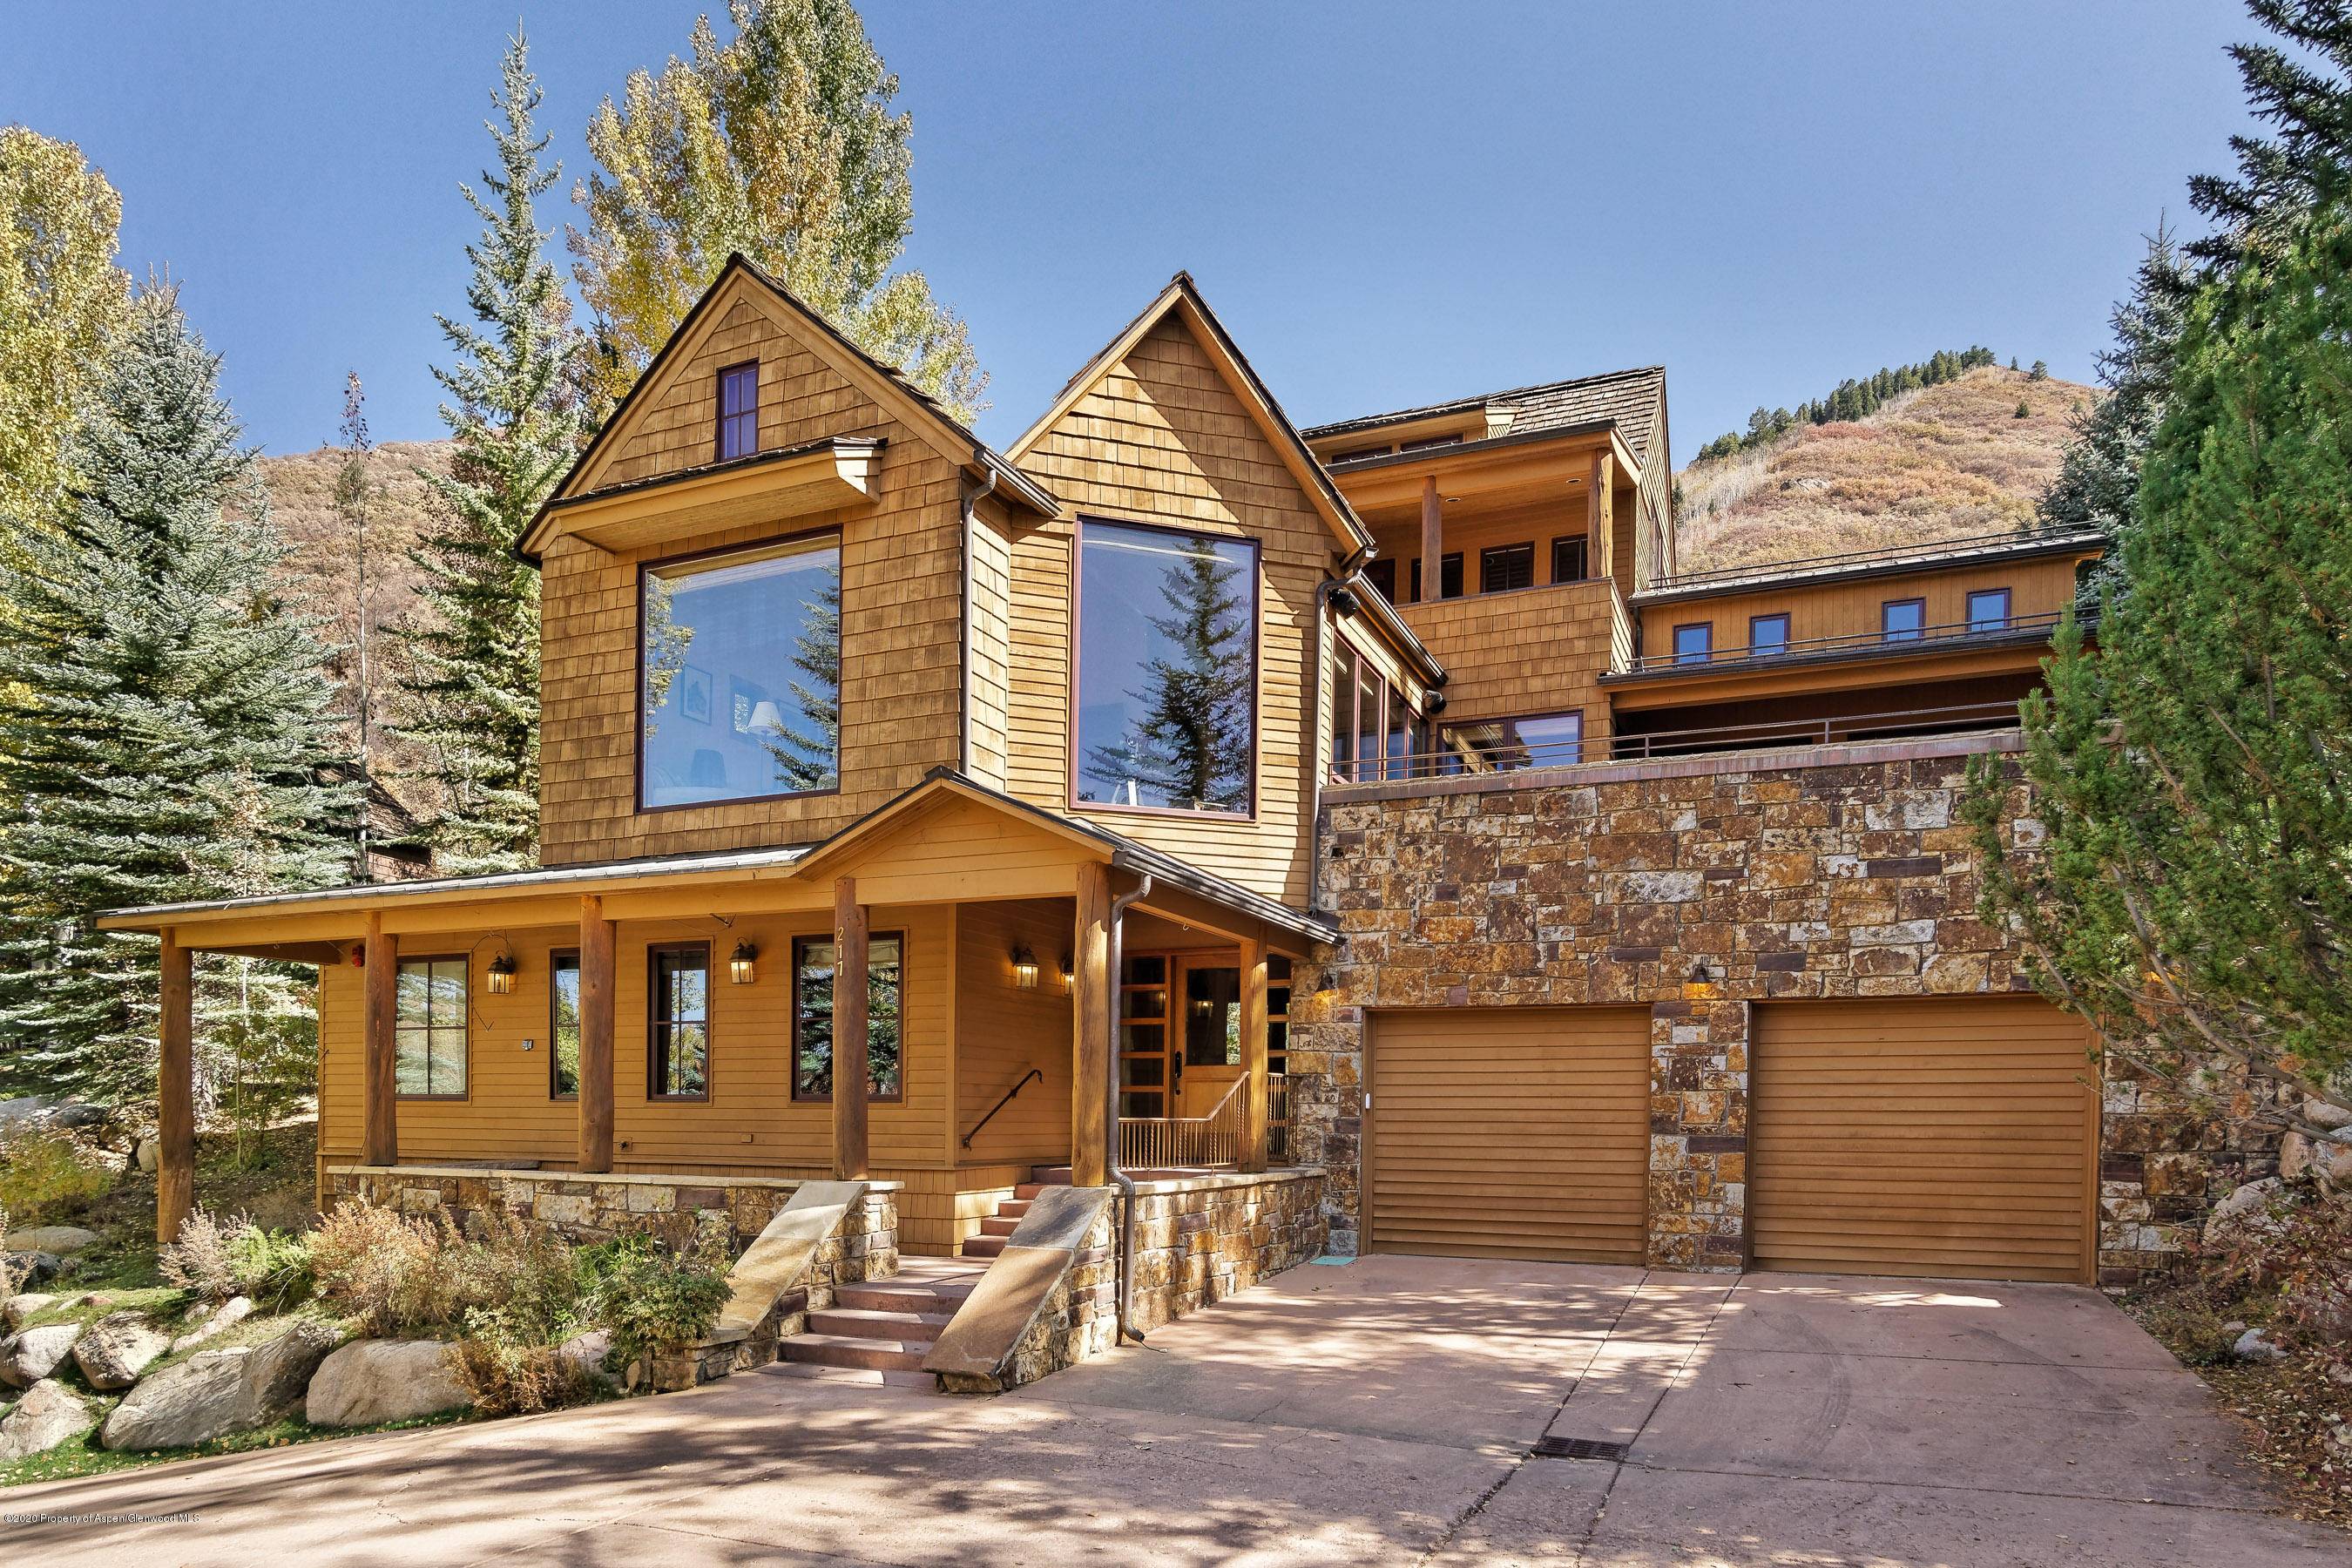 This quintissential mountain home is the perfect Aspen property for a family vacation or group getaway.